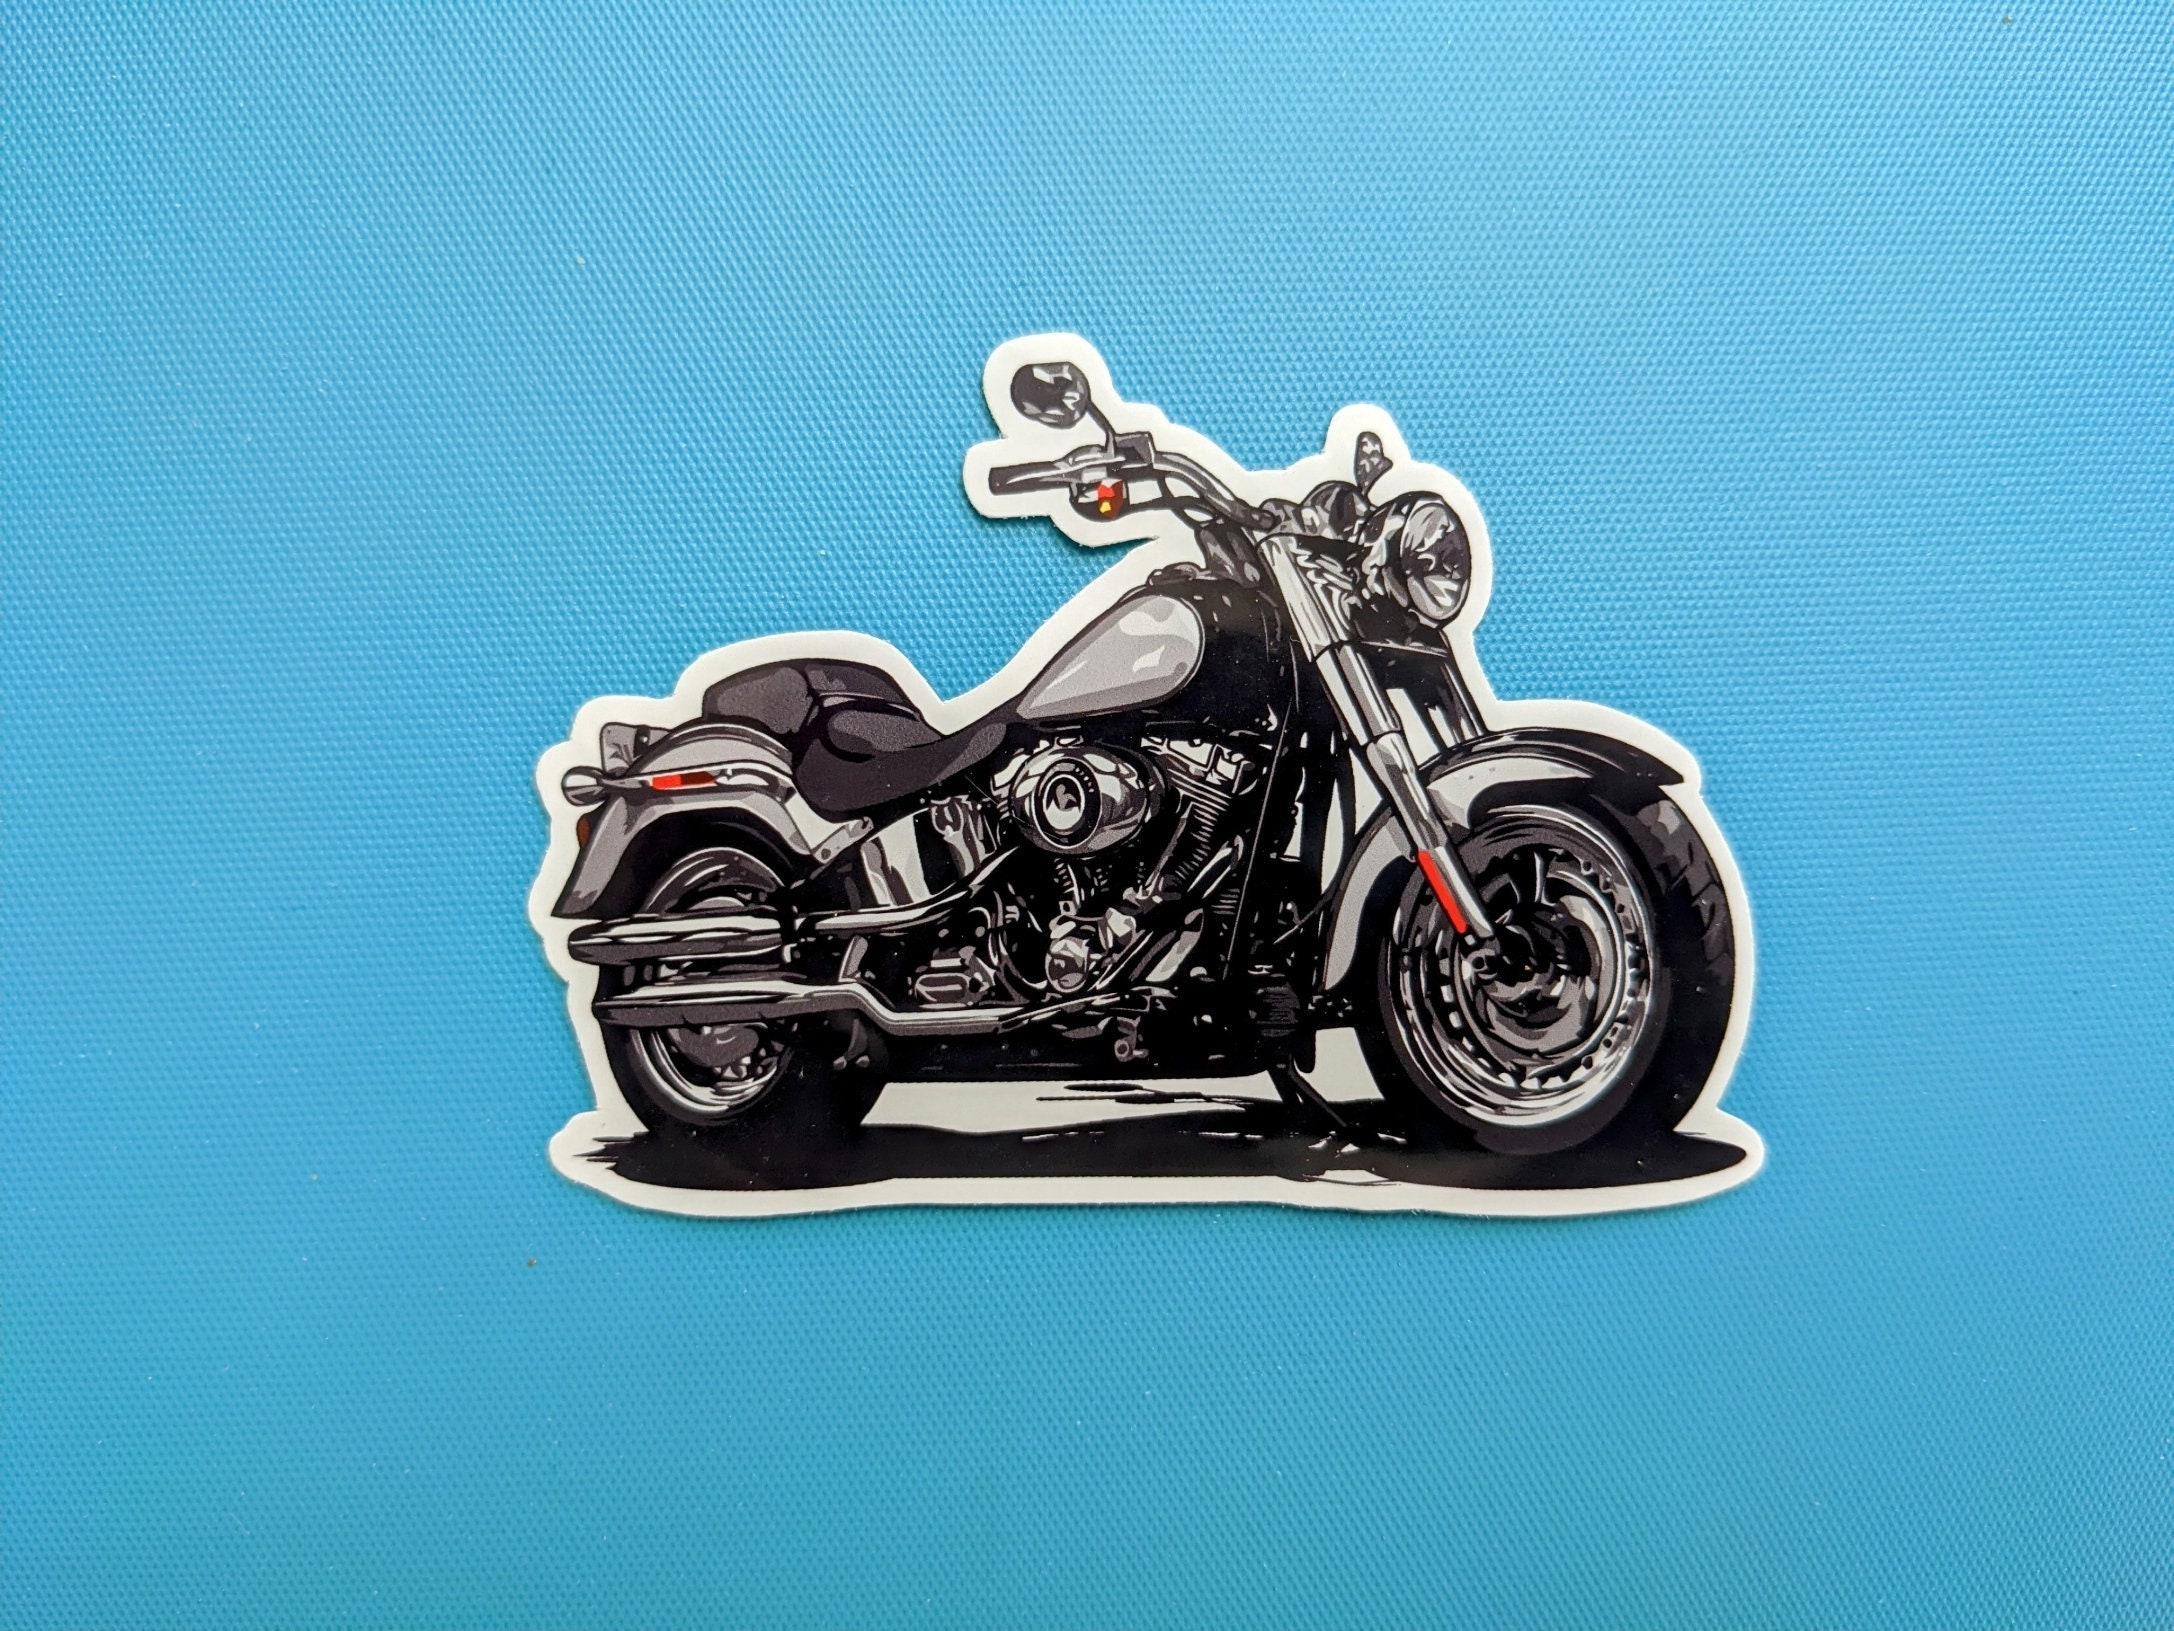 100 Pcs Cool Stickers Pack Fashion Stickers for Laptop Motorcycle Bicycle  Skateboard Luggage Decal Graffiti Patches Stickers 